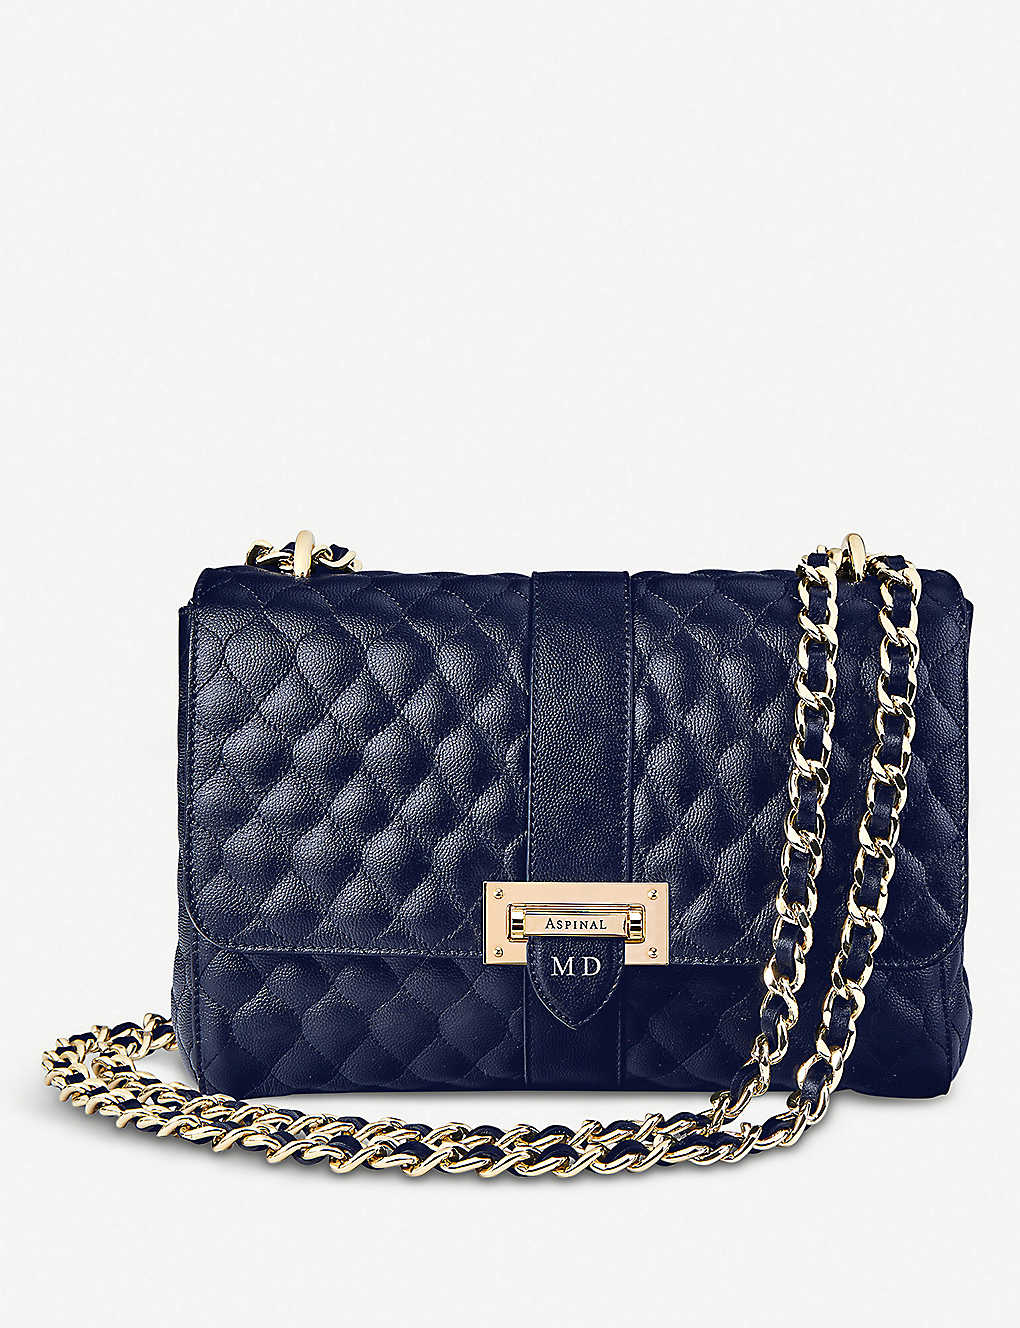 Shop Aspinal Of London Women's Navy Lottie Large Quilted Leather Shoulder Bag